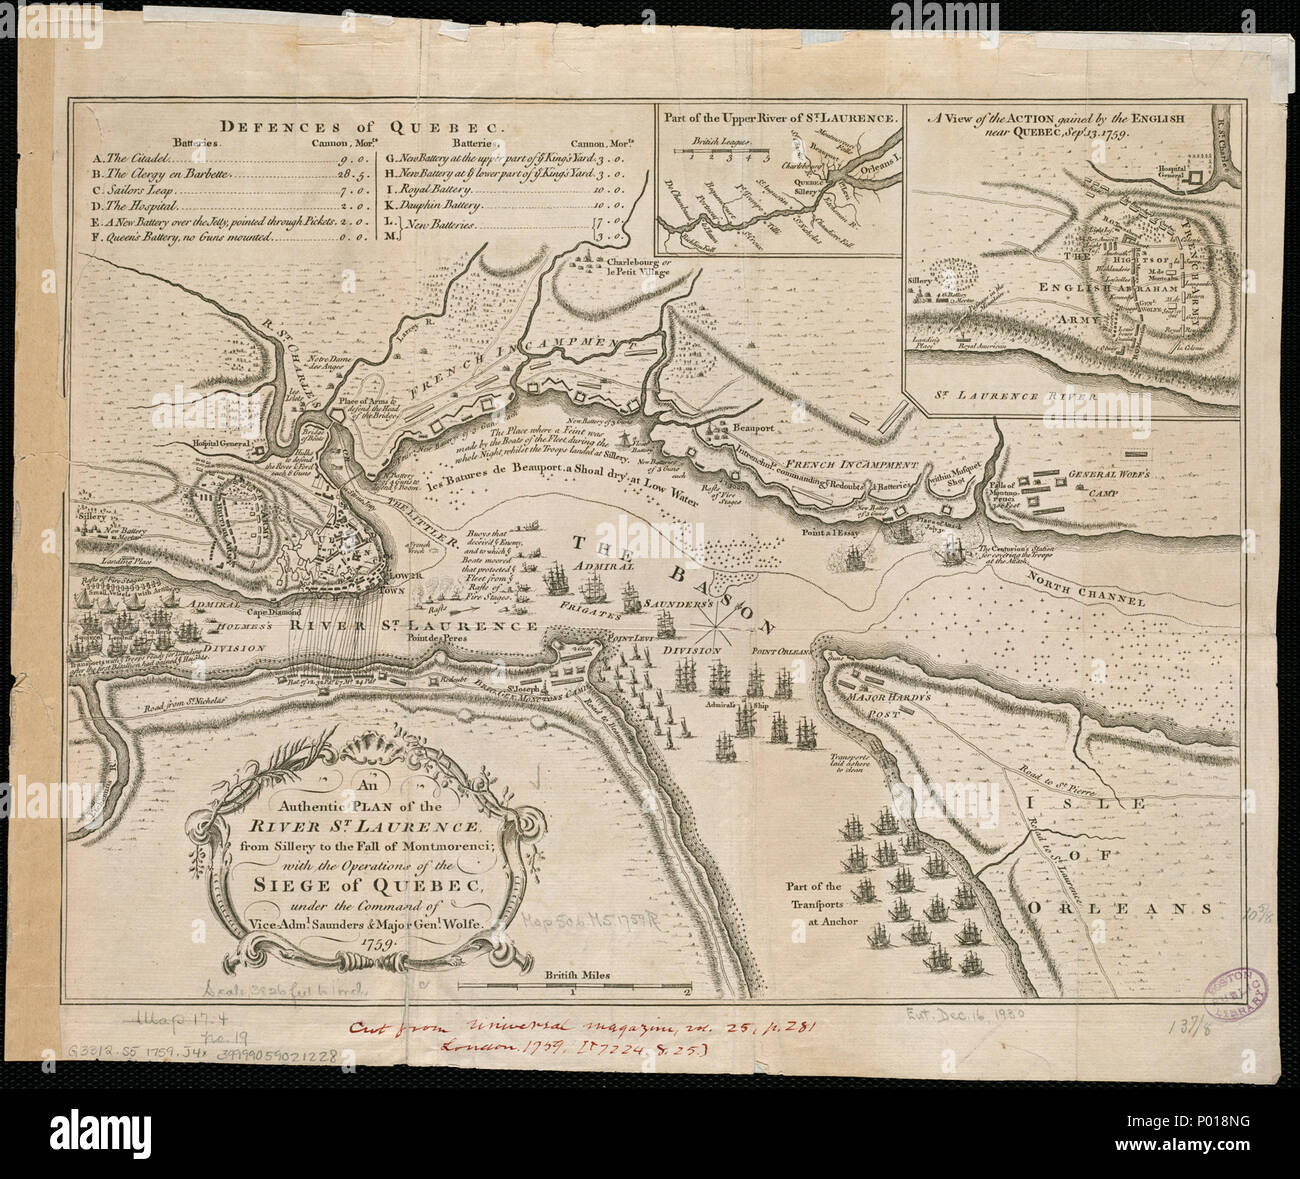 . 'An authentic plan of the River St. Laurence, from Sillery to the Fall of Montmorenci, with the operations of the Siege of Quebec, under the command of Vice-Adml. Saunders & Major Genl. Wolfe' Location: Québec (Quebec), Saint Lawrence River Cut from Universal Magazine, vol. 25, p.281, London, 1759 Dimension: 27x36cm Scale: ca. 1:35,000 Call Number: G3312.S5 1759 .J4x  . Map: 1759 (Photographic reproduction: 2009-12-30 14:47). Map:   Thomas Jefferys  (1719–1771)    Alternative names Thomas Gefferys, Thomas Jefferies, Thomas Jeffreys  Description English cartographer and geographer  Date of bi Stock Photo